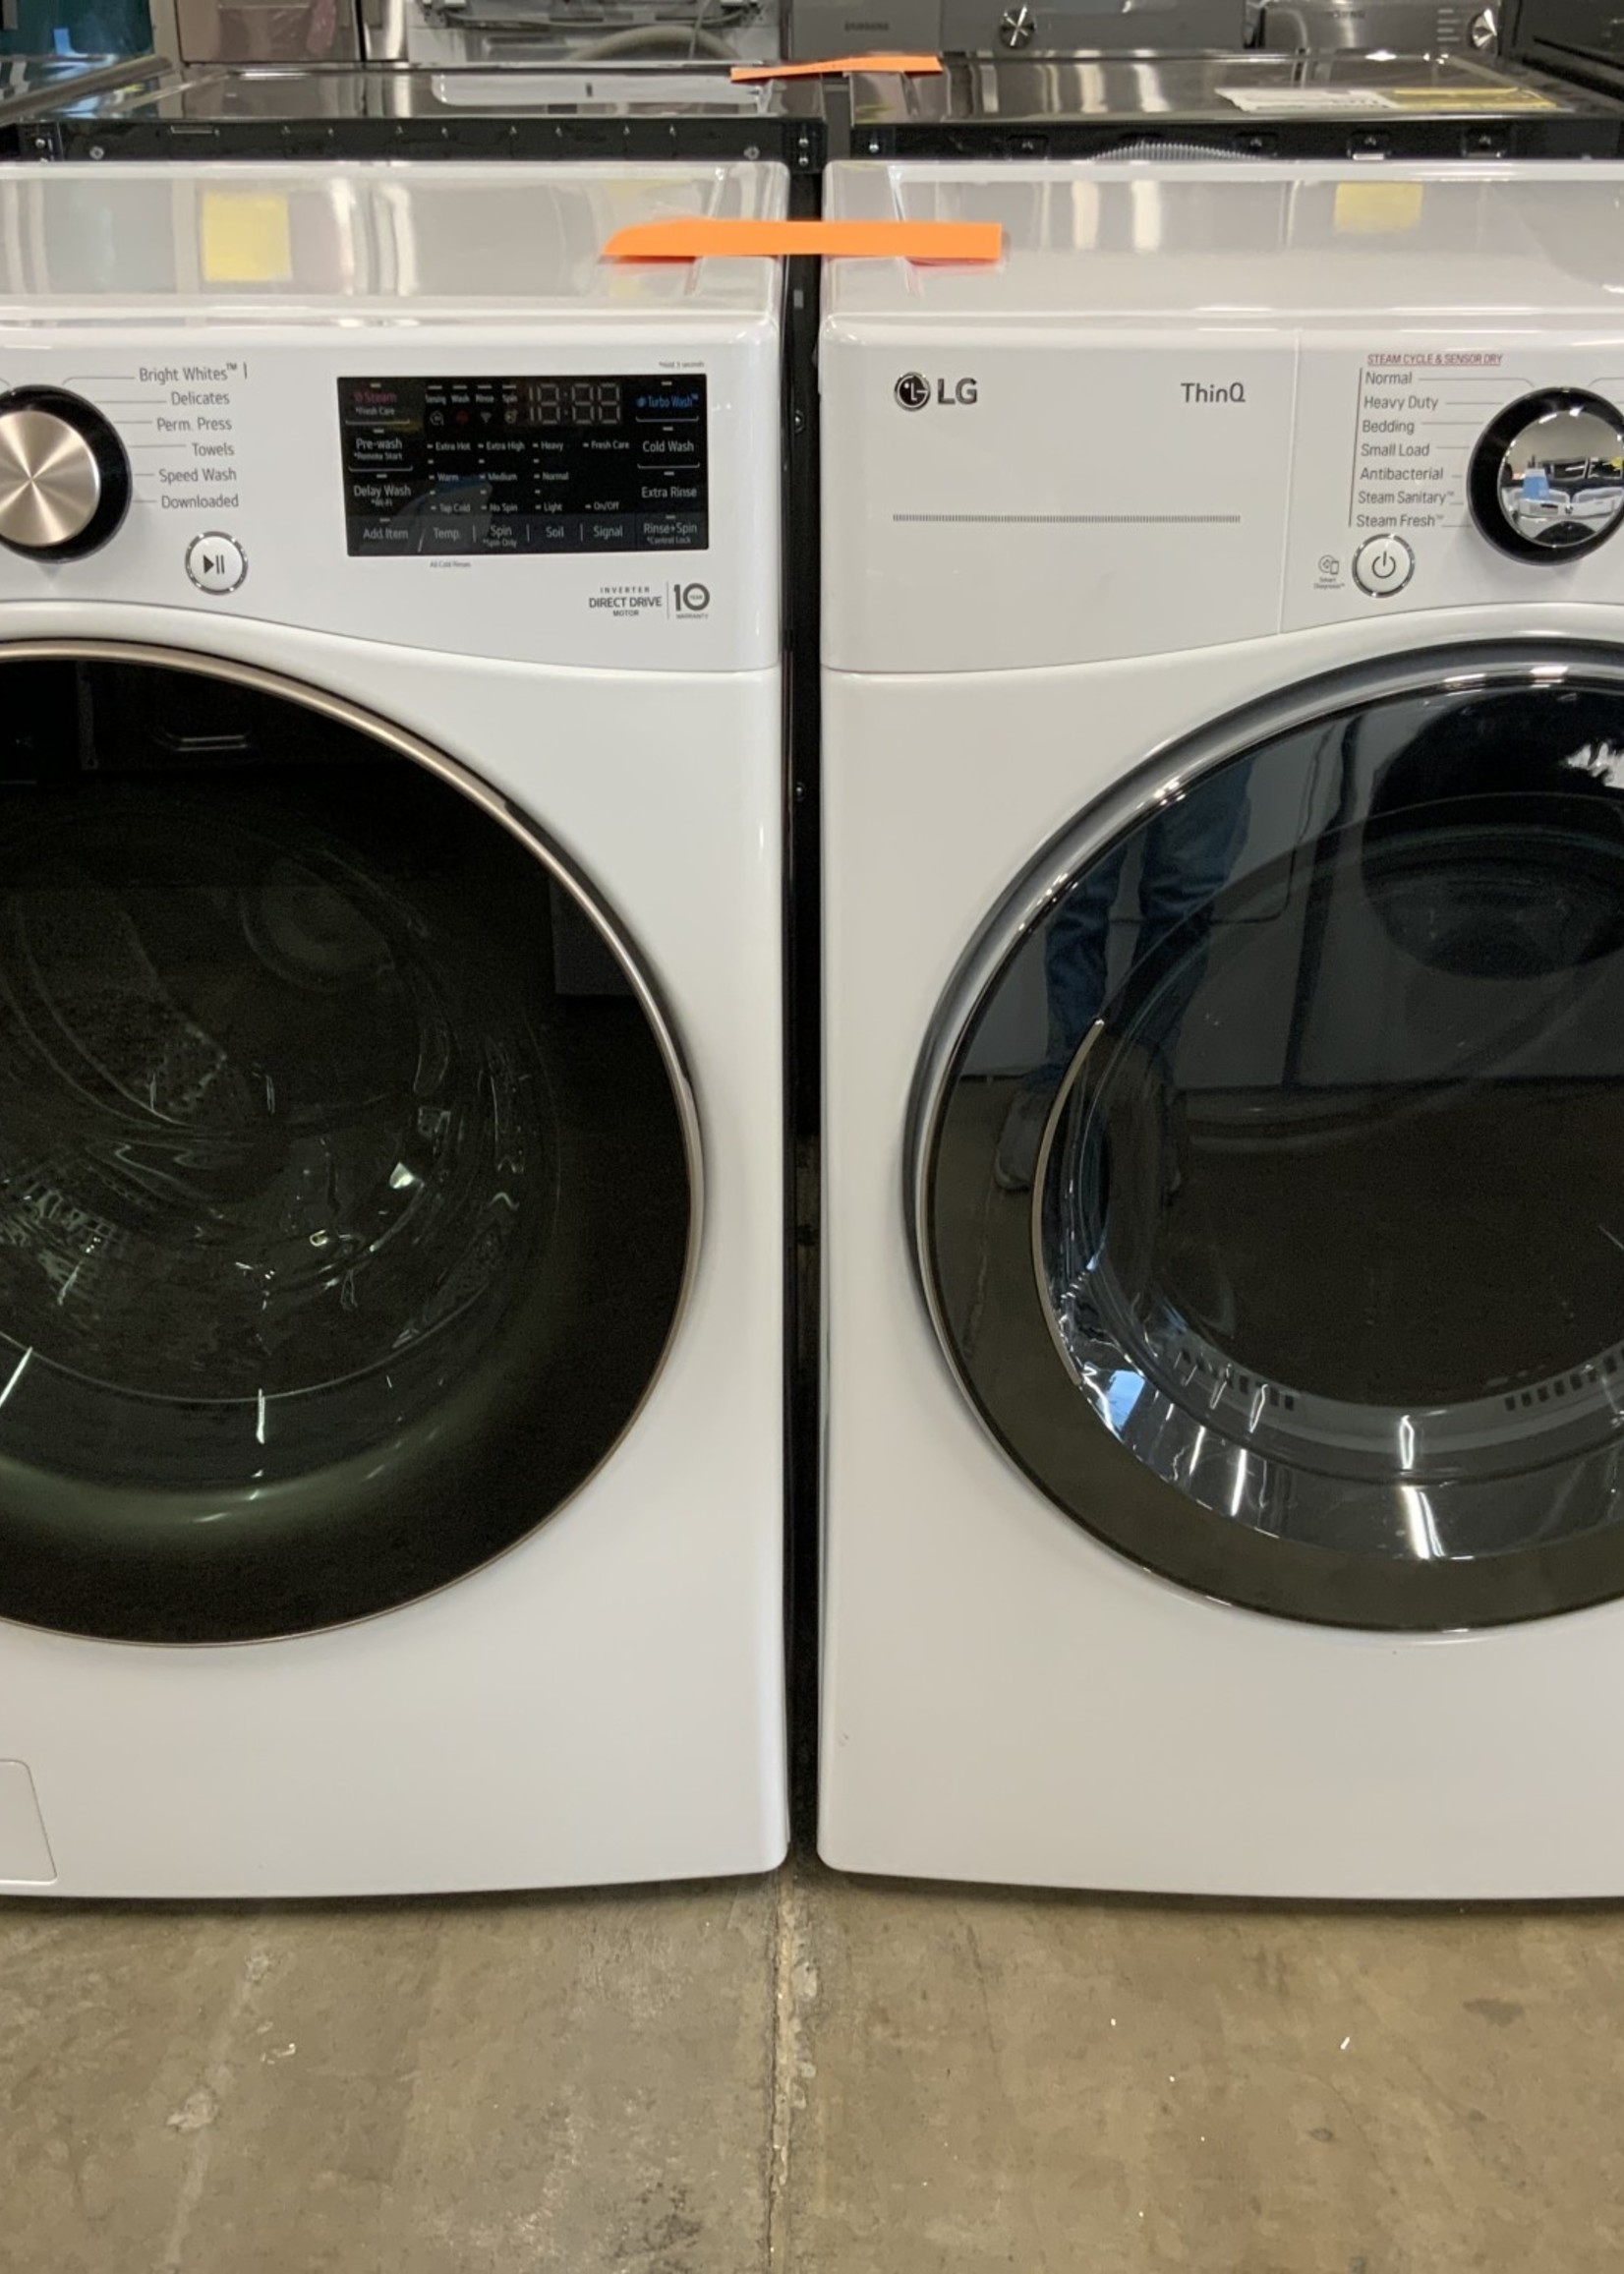 LG Copy of LG FRONT LOAD WASHER & DRYER SET  ThingQ